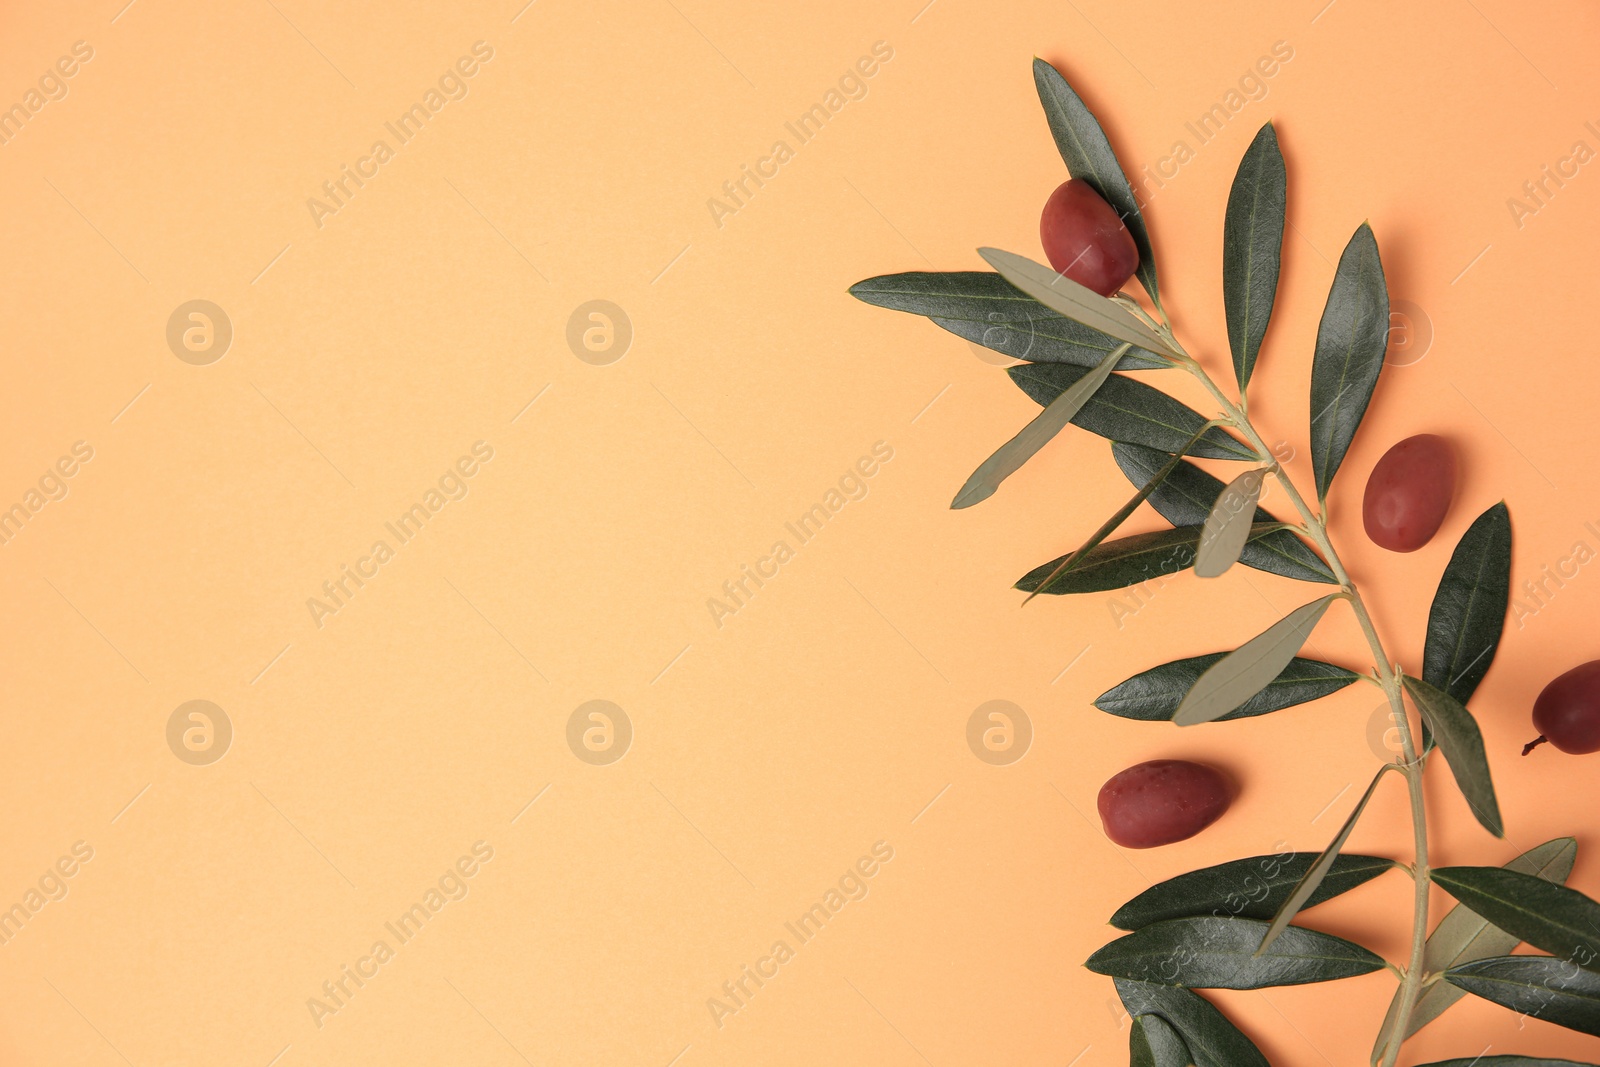 Photo of Fresh olives and green leaves on pale orange background, flat lay. Space for text